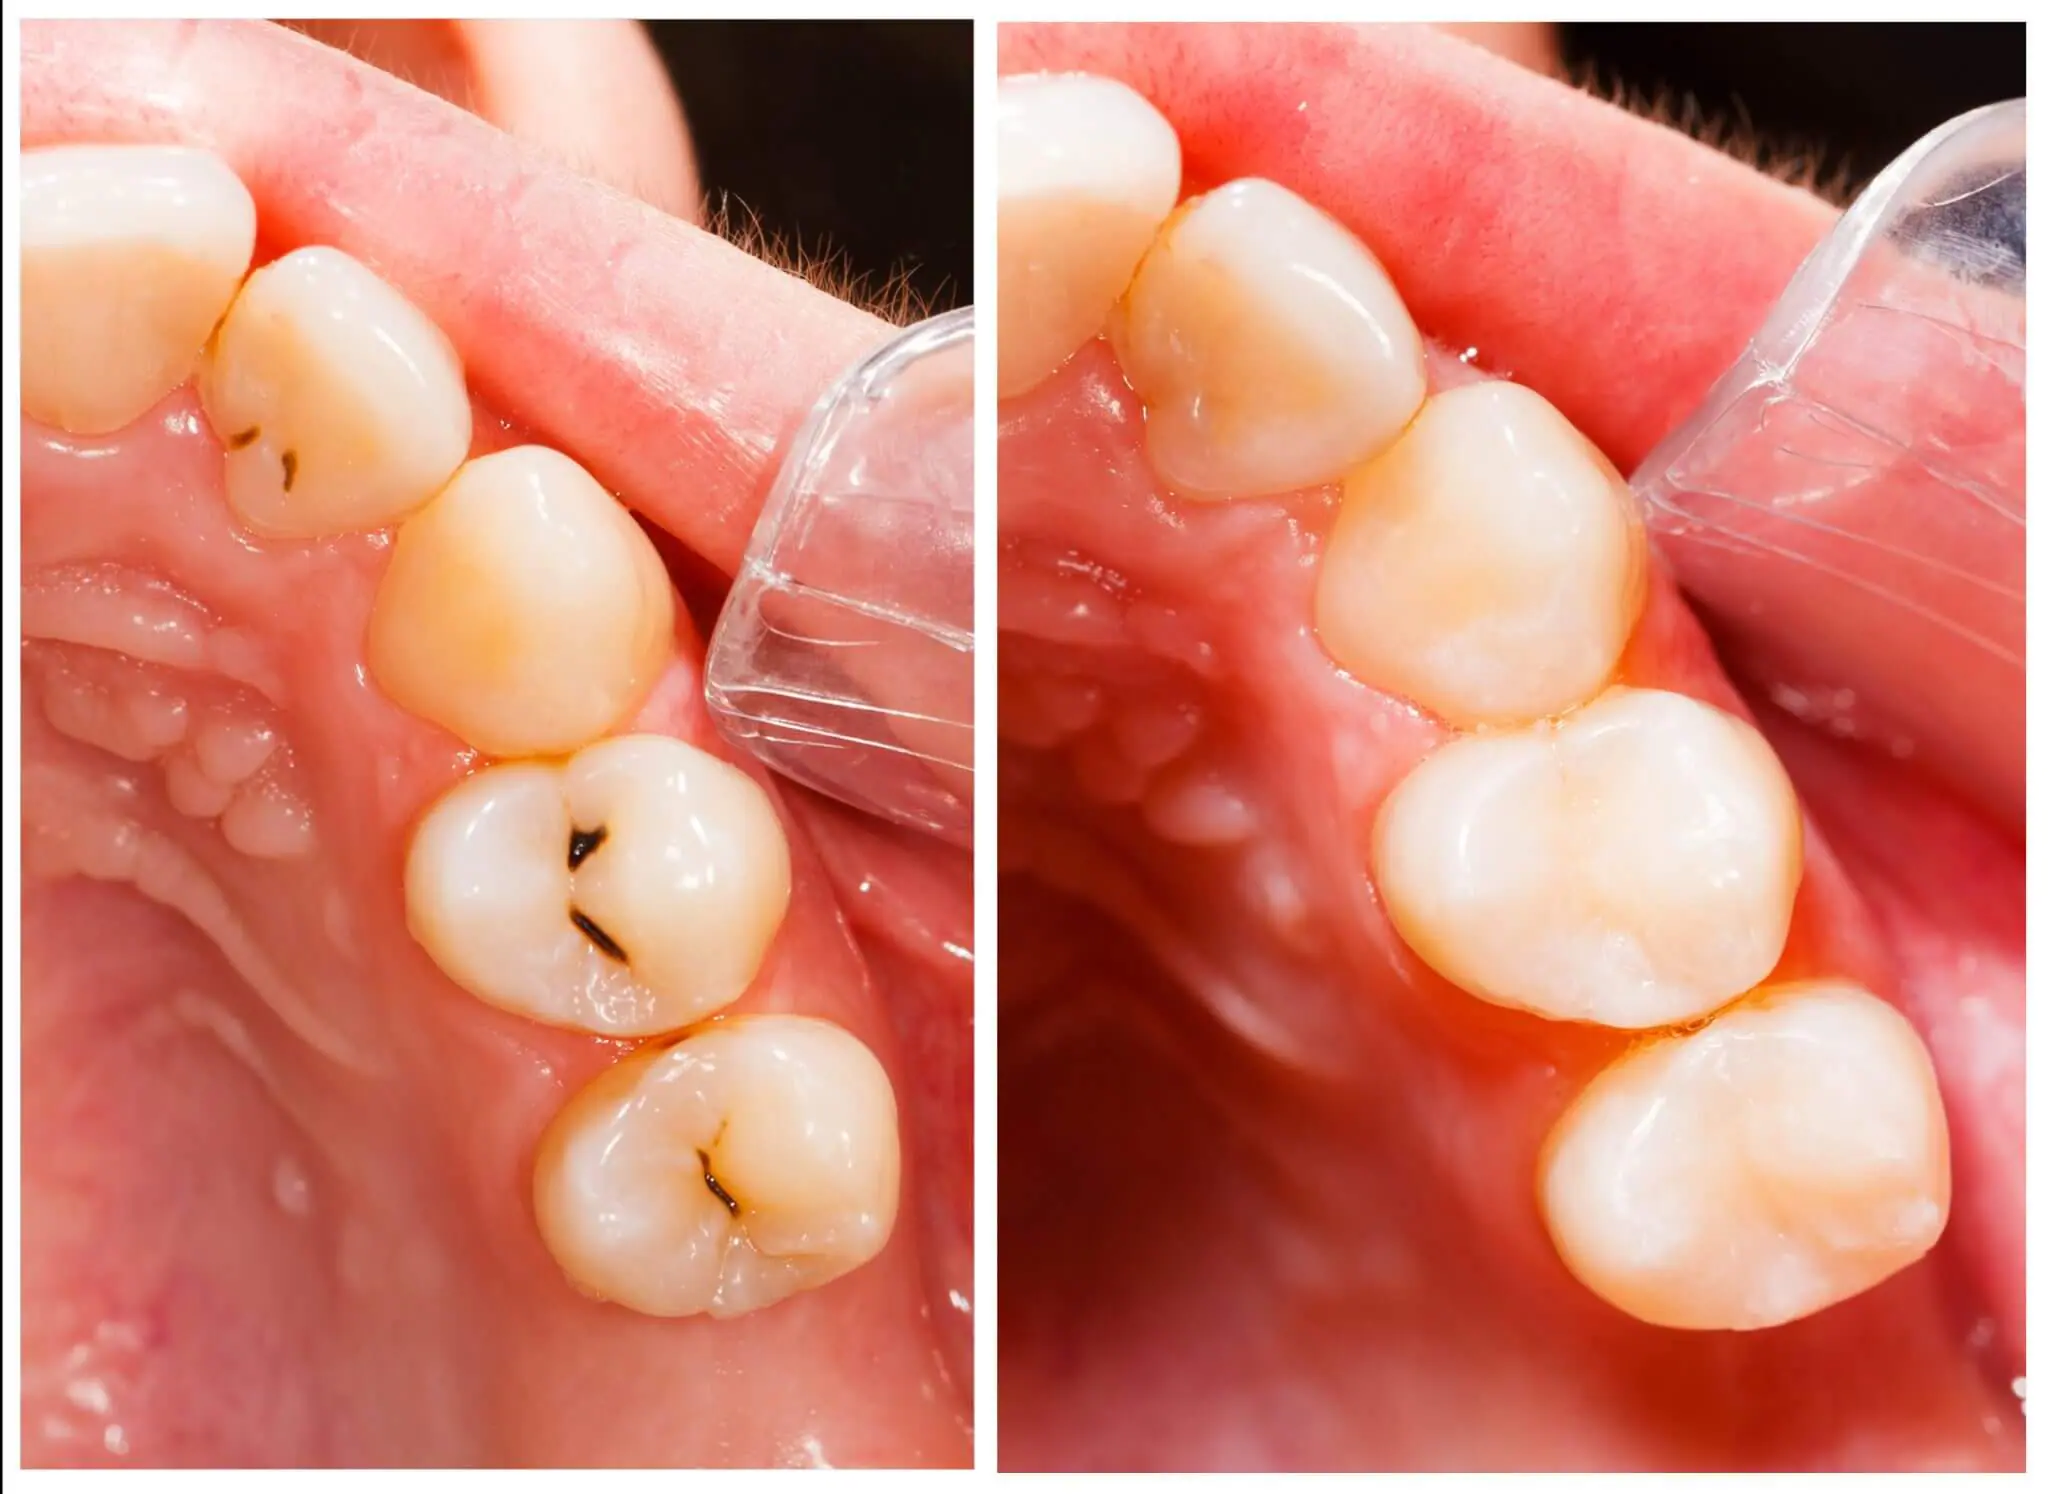 Cavity Between Teeth - Causes and Treatment Options